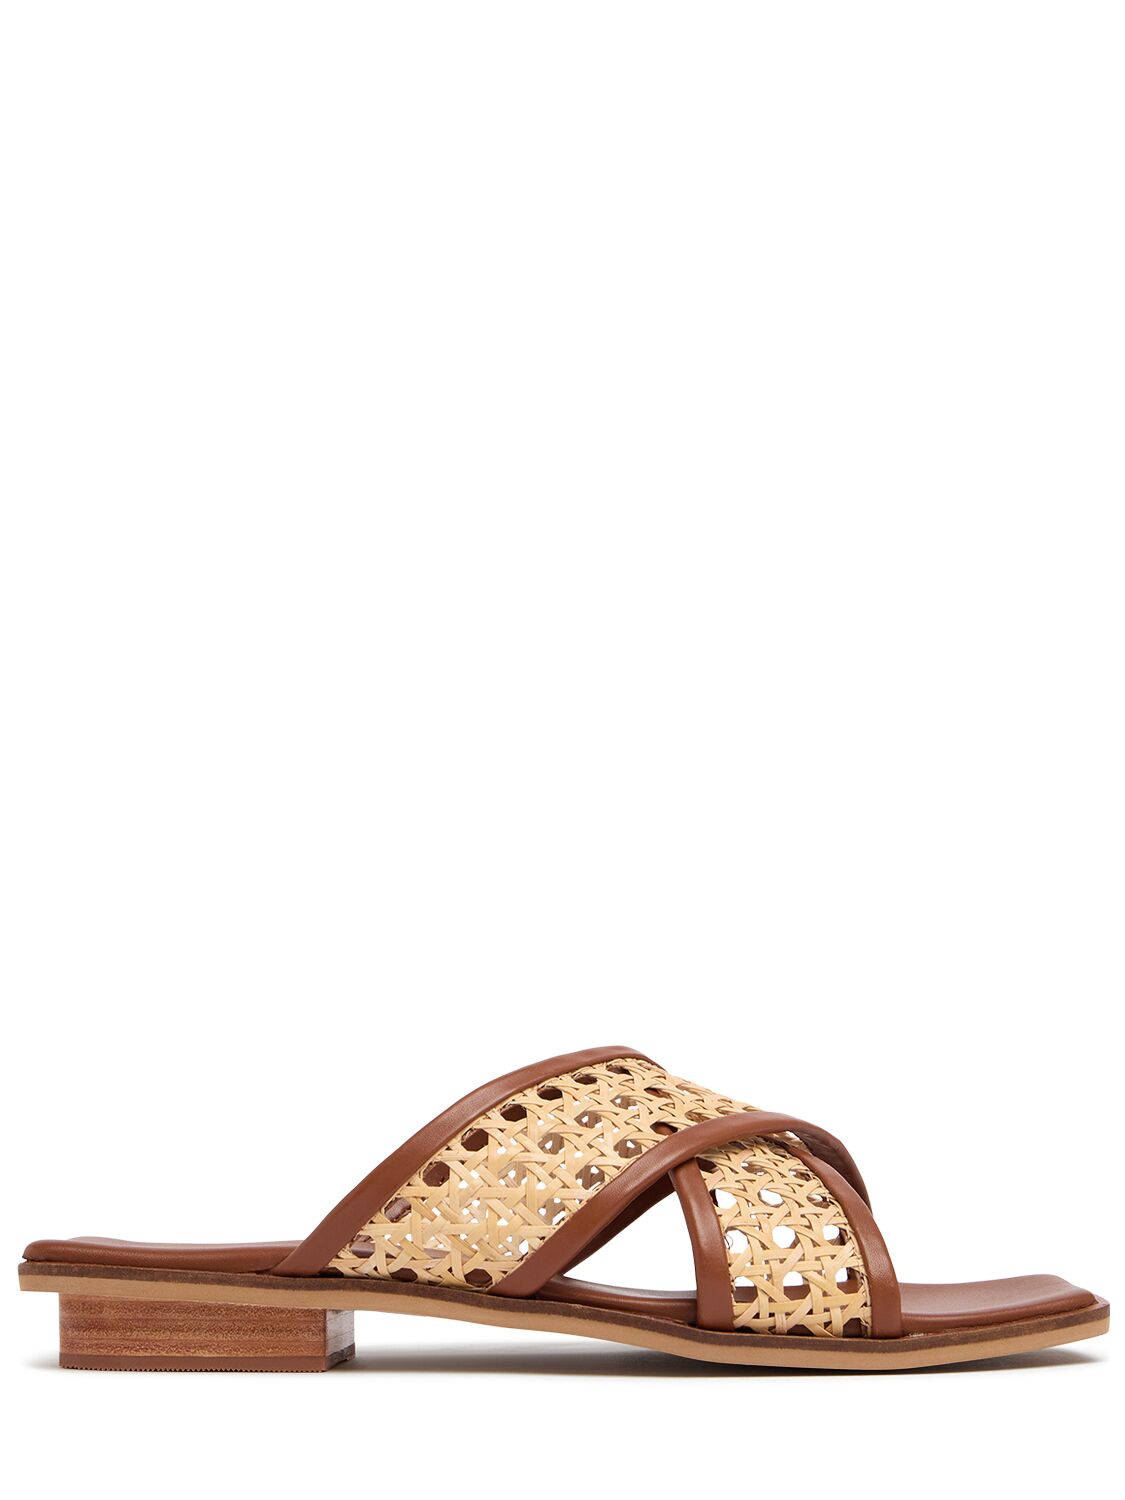 Bembien 10mm Roma Leather & Rattan Slides In Brown